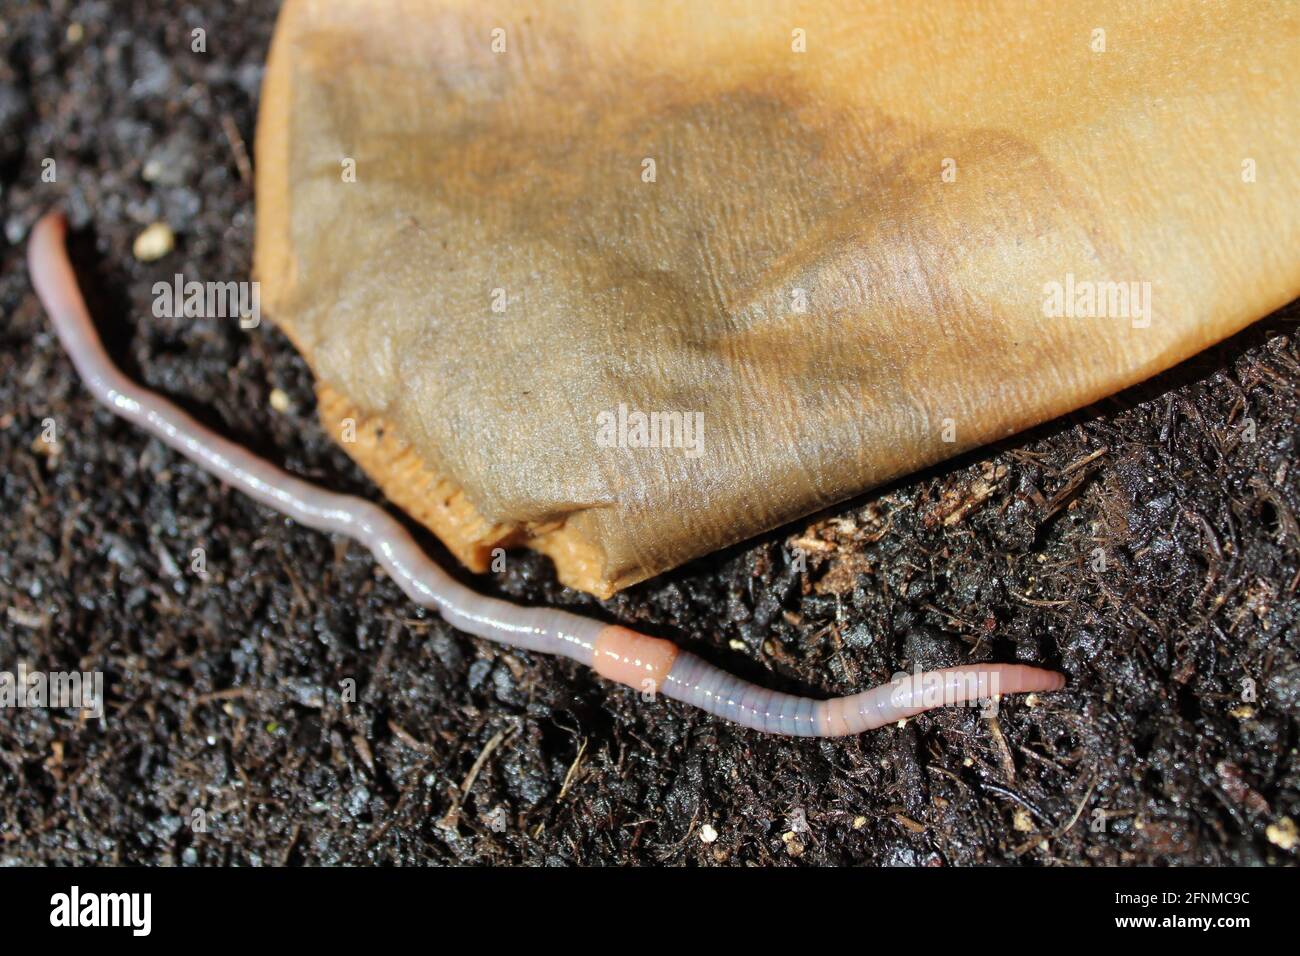 an earthworm and a coffee filter Stock Photo